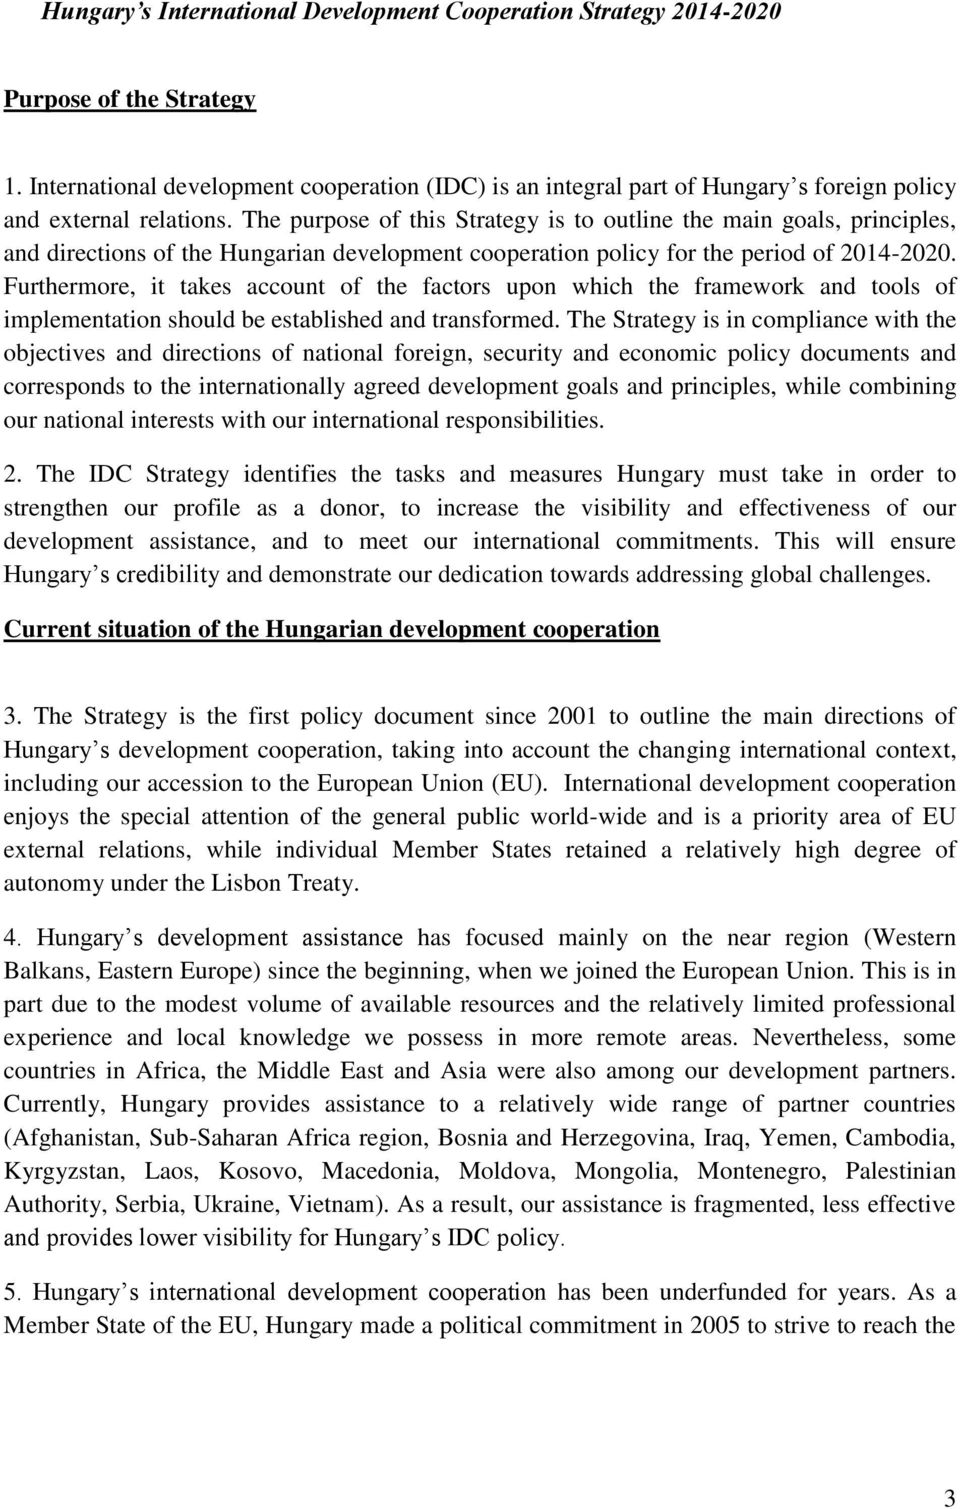 The purpose of this Strategy is to outline the main goals, principles, and directions of the Hungarian development cooperation policy for the period of 2014-2020.